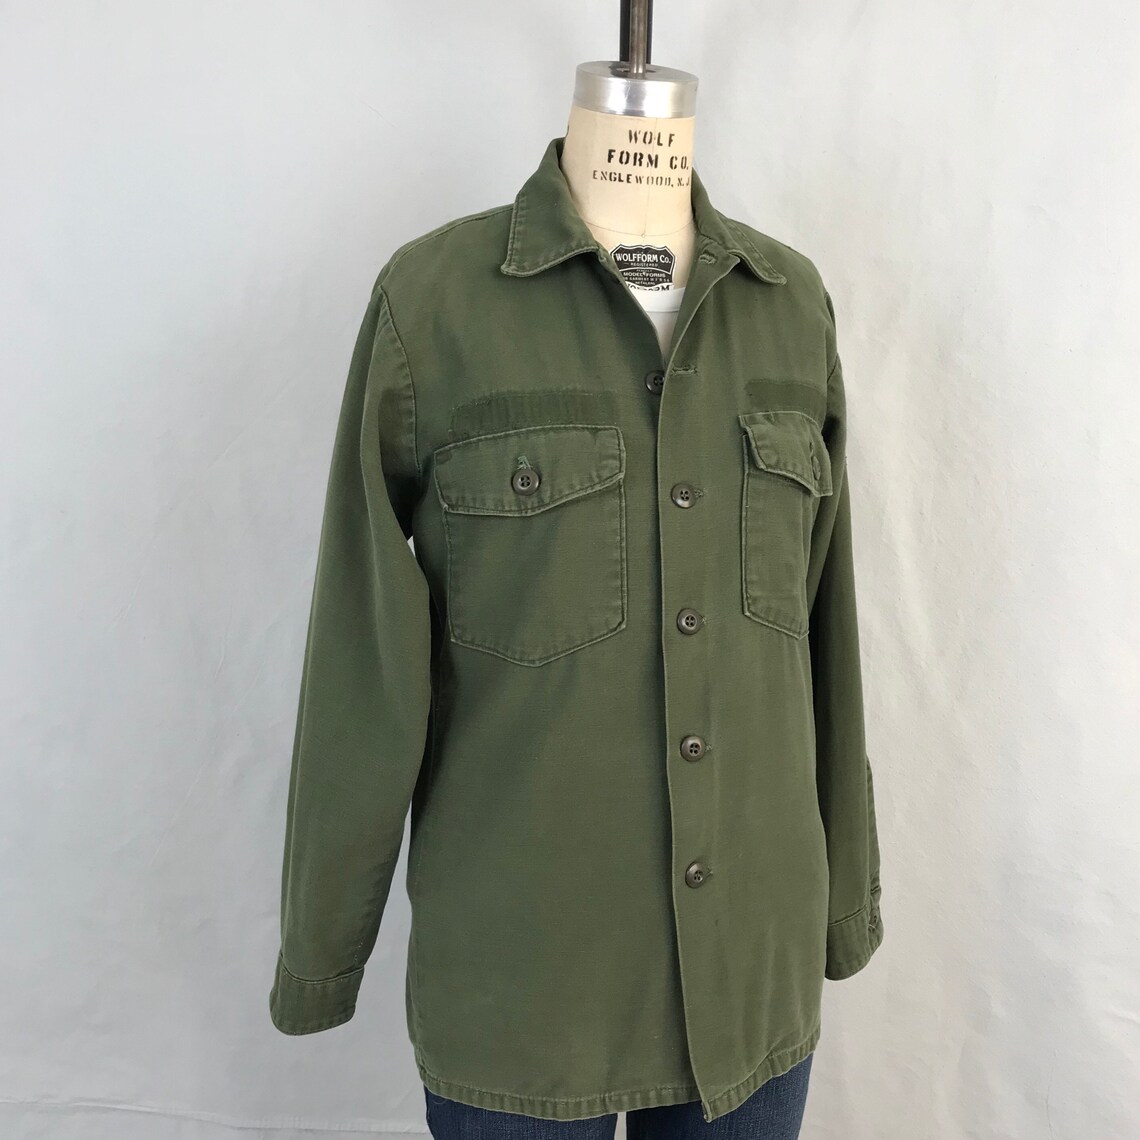 Vintage 1970s Army Green Shirt 70s Cotton Sateen Utility Shirt | Etsy